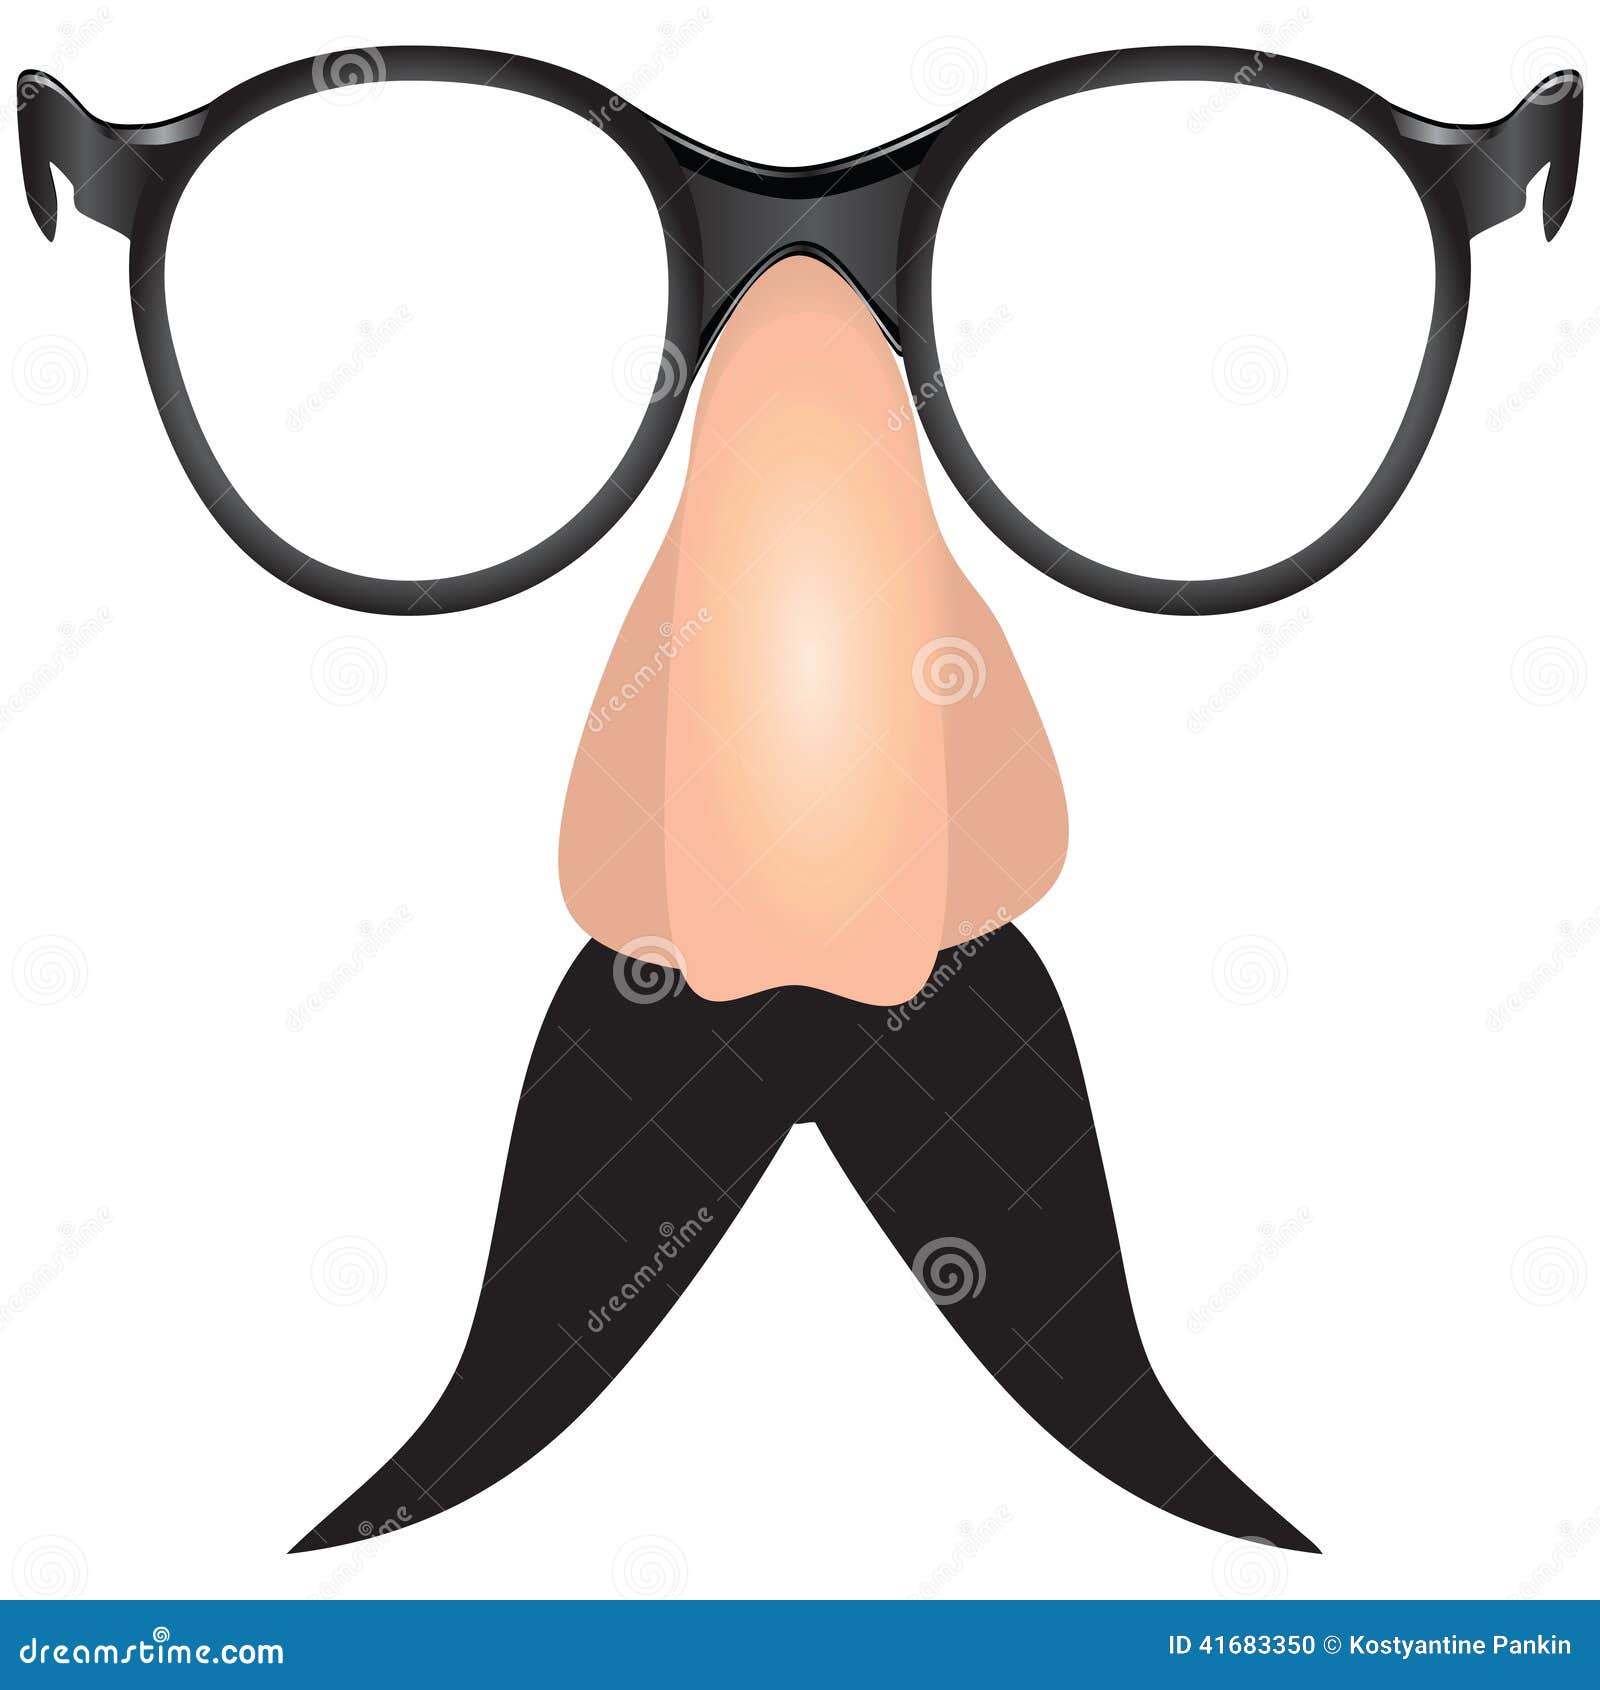 Drooping Mustache Stock Illustration - Image: 41683350